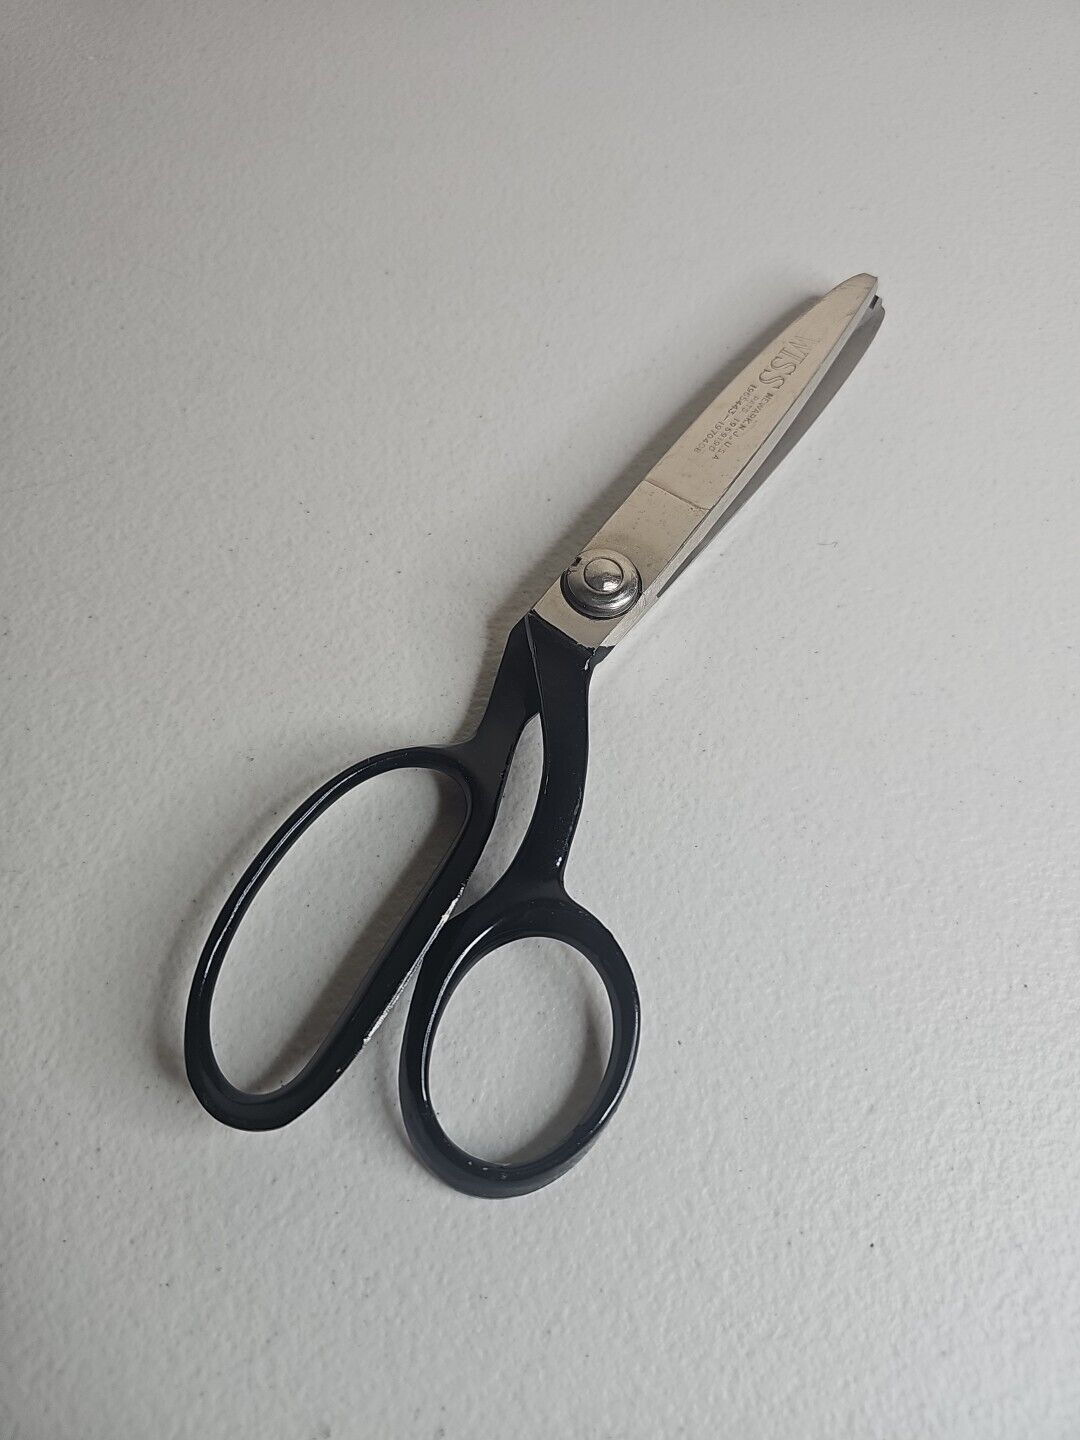 WISS Pinking Shears Scissors  Made In USA Vintage Tailoring 